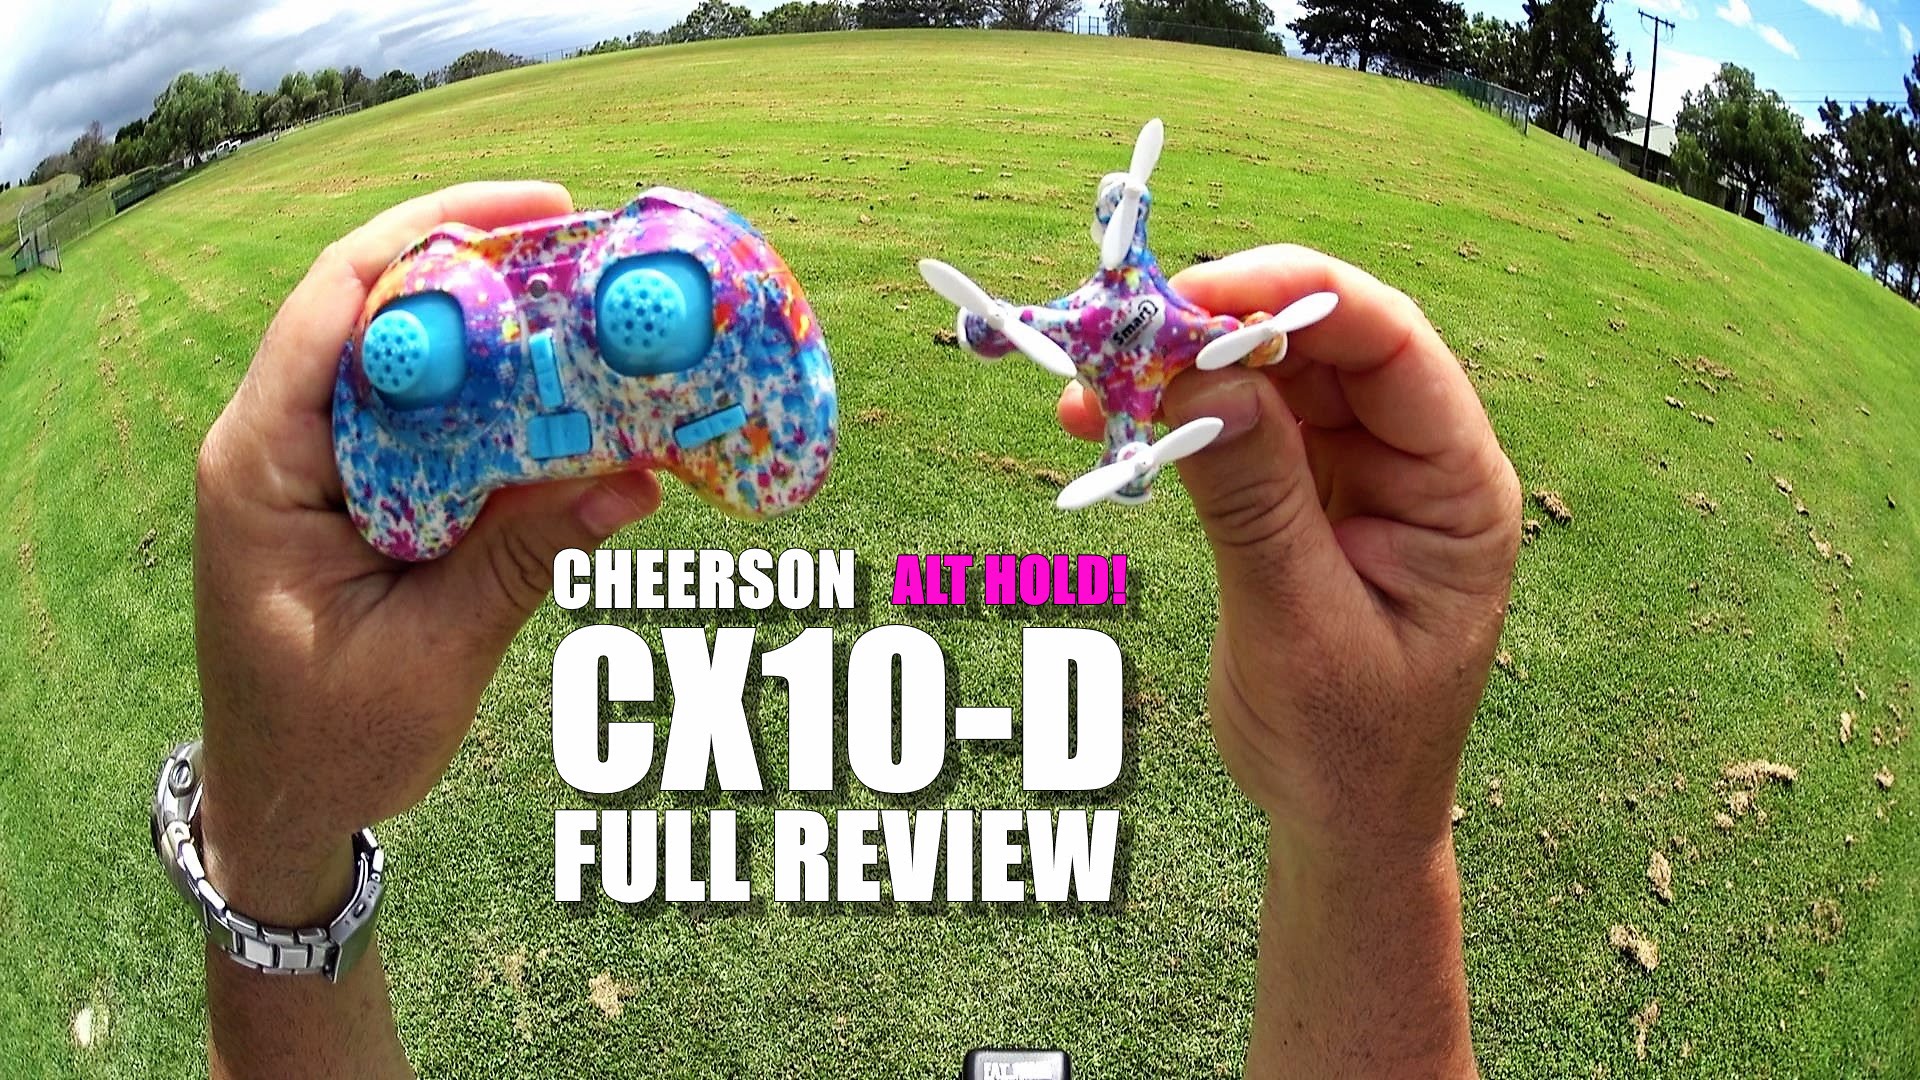 CHEERSON CX10-D NANO QuadCopter Full Review –  [UnBox, Inpection, Flight Test, Pros & Cons]